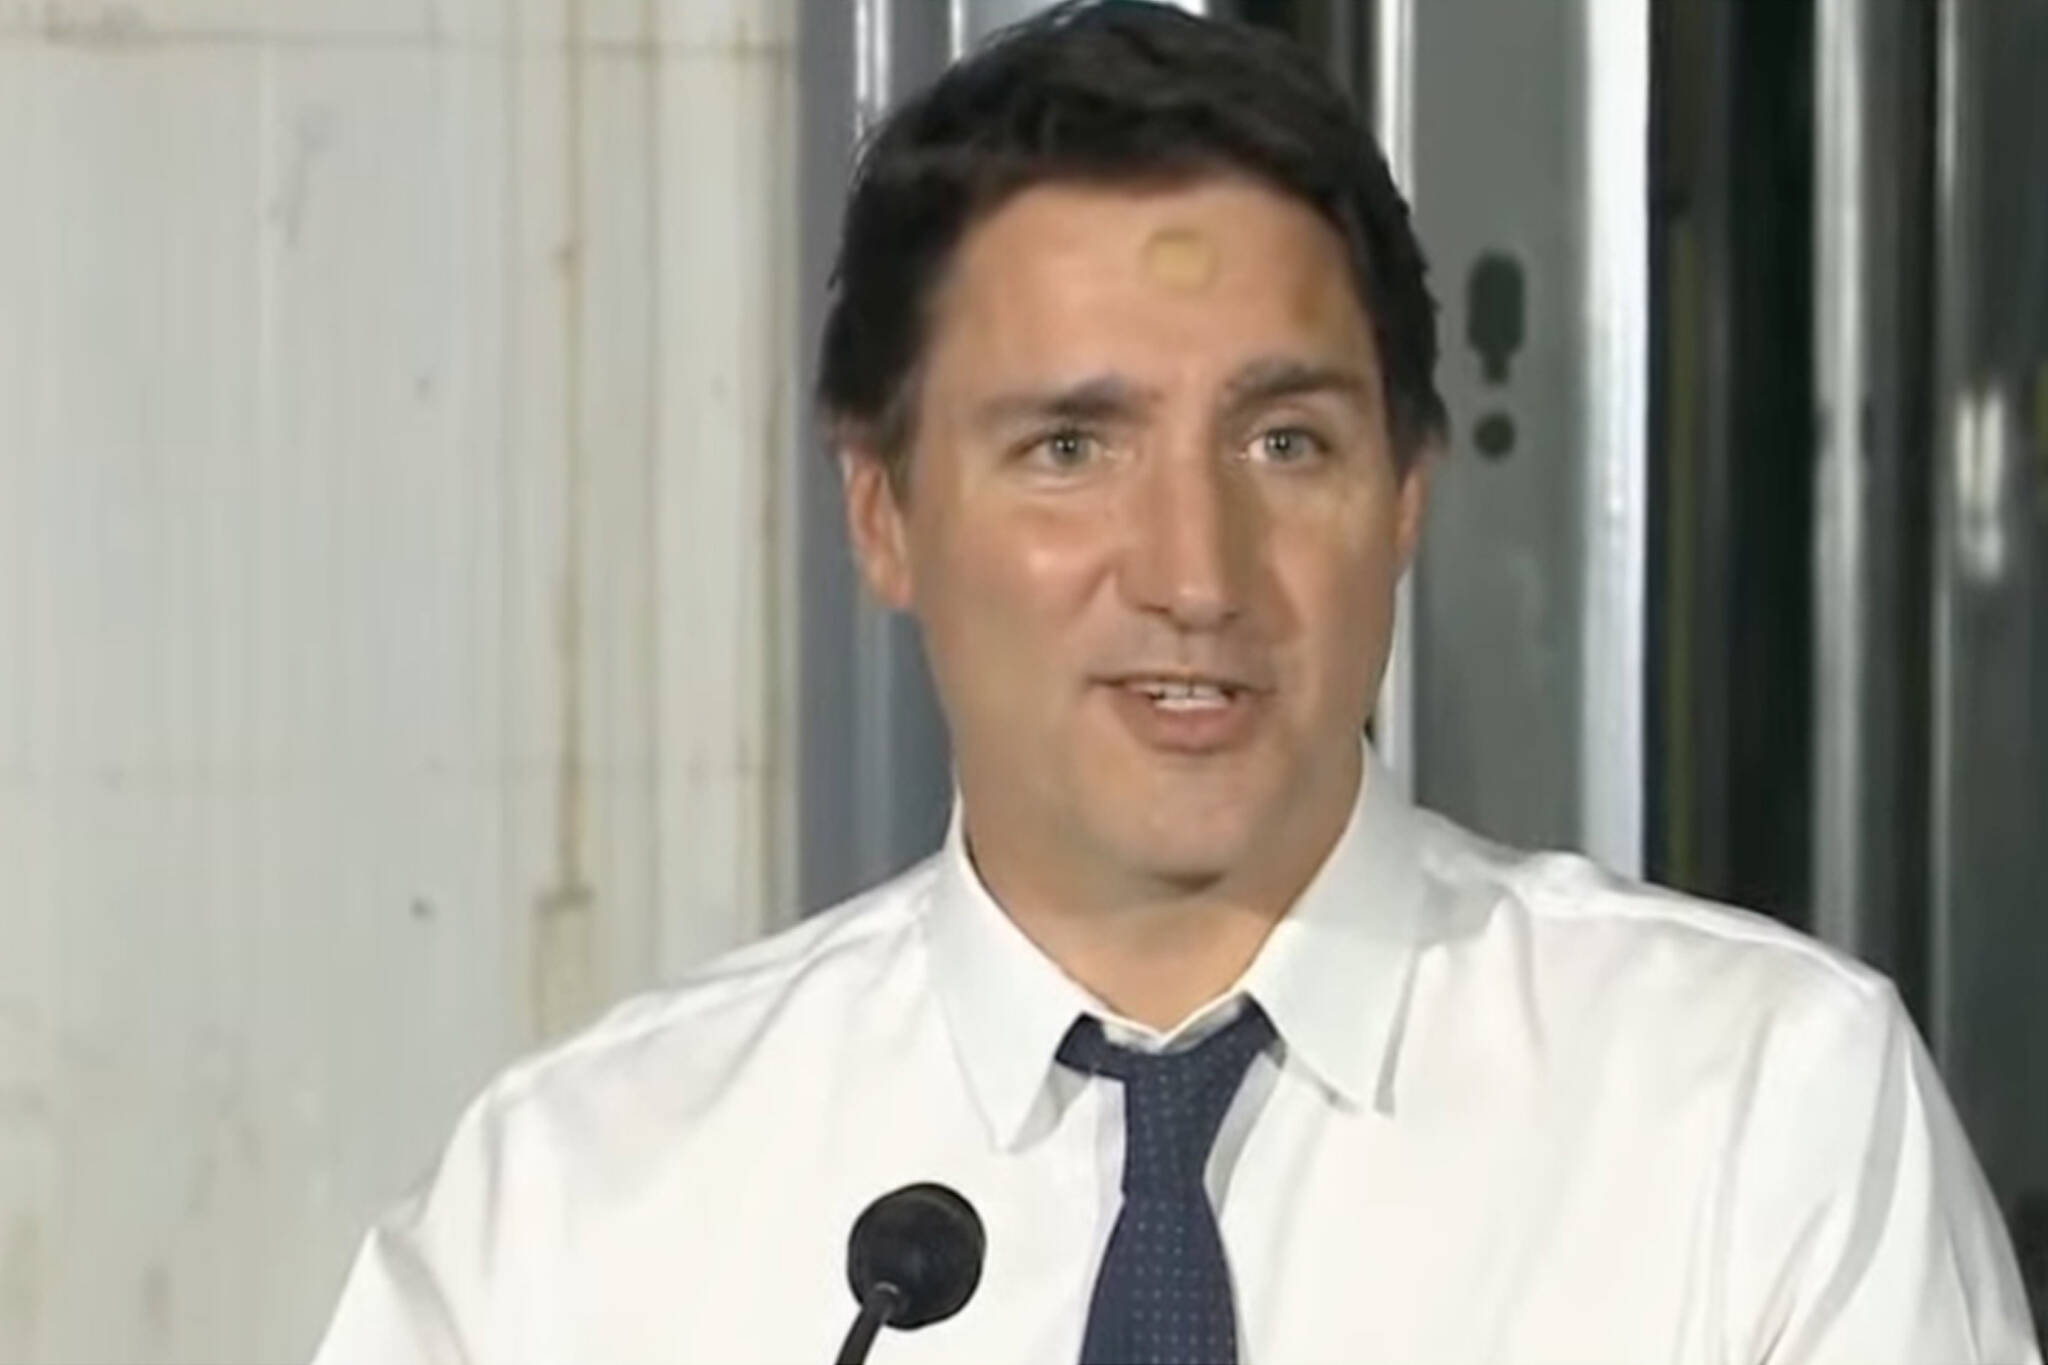 Canadians Wonder What Happened To Justin Trudeaus Forehead